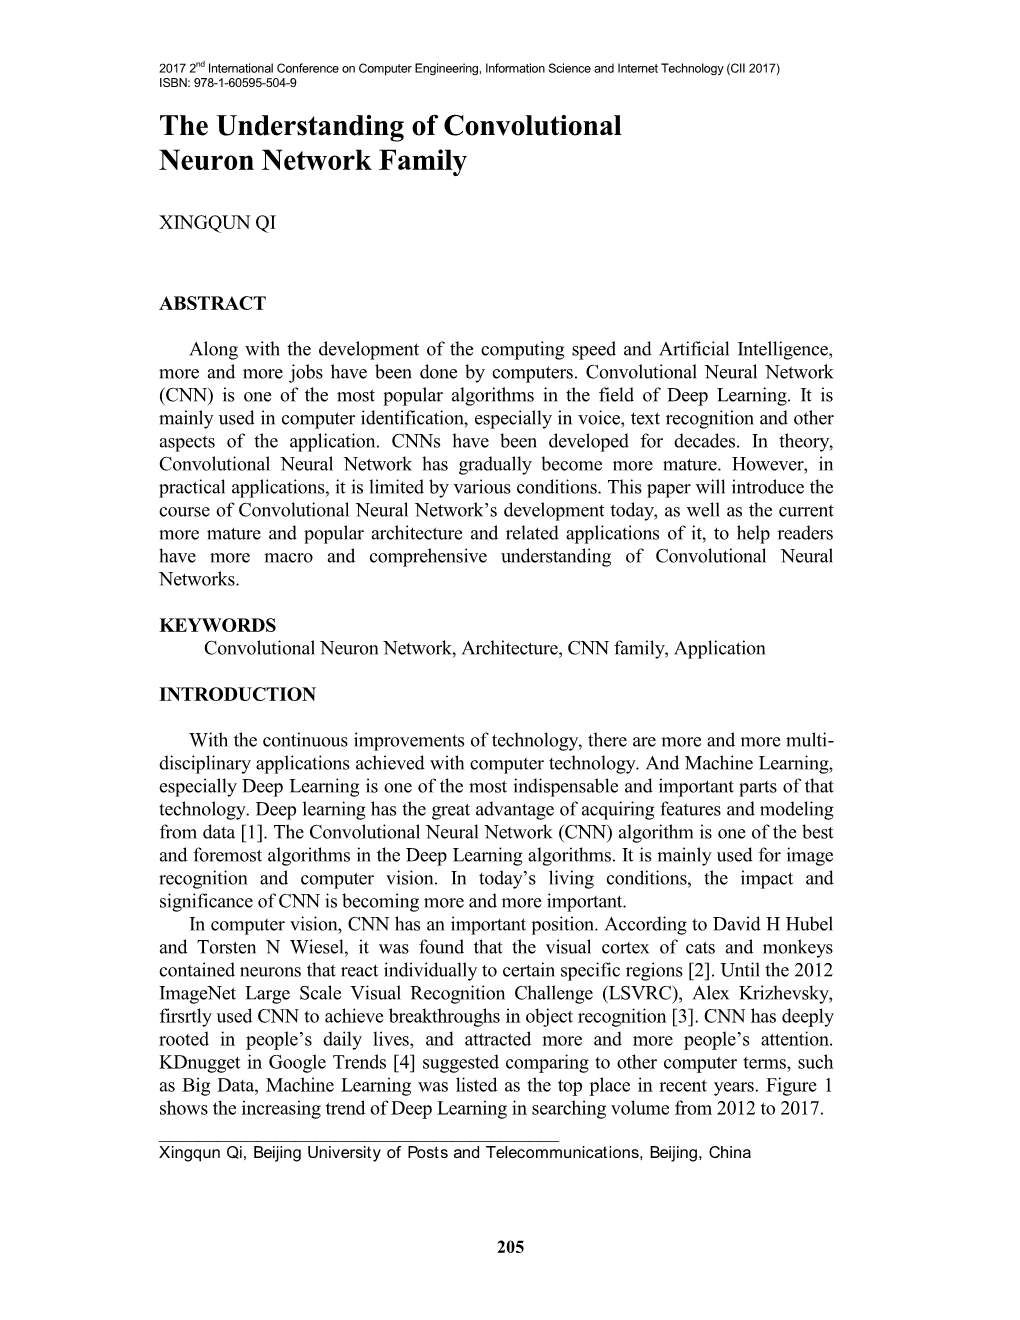 The Understanding of Convolutional Neuron Network Family